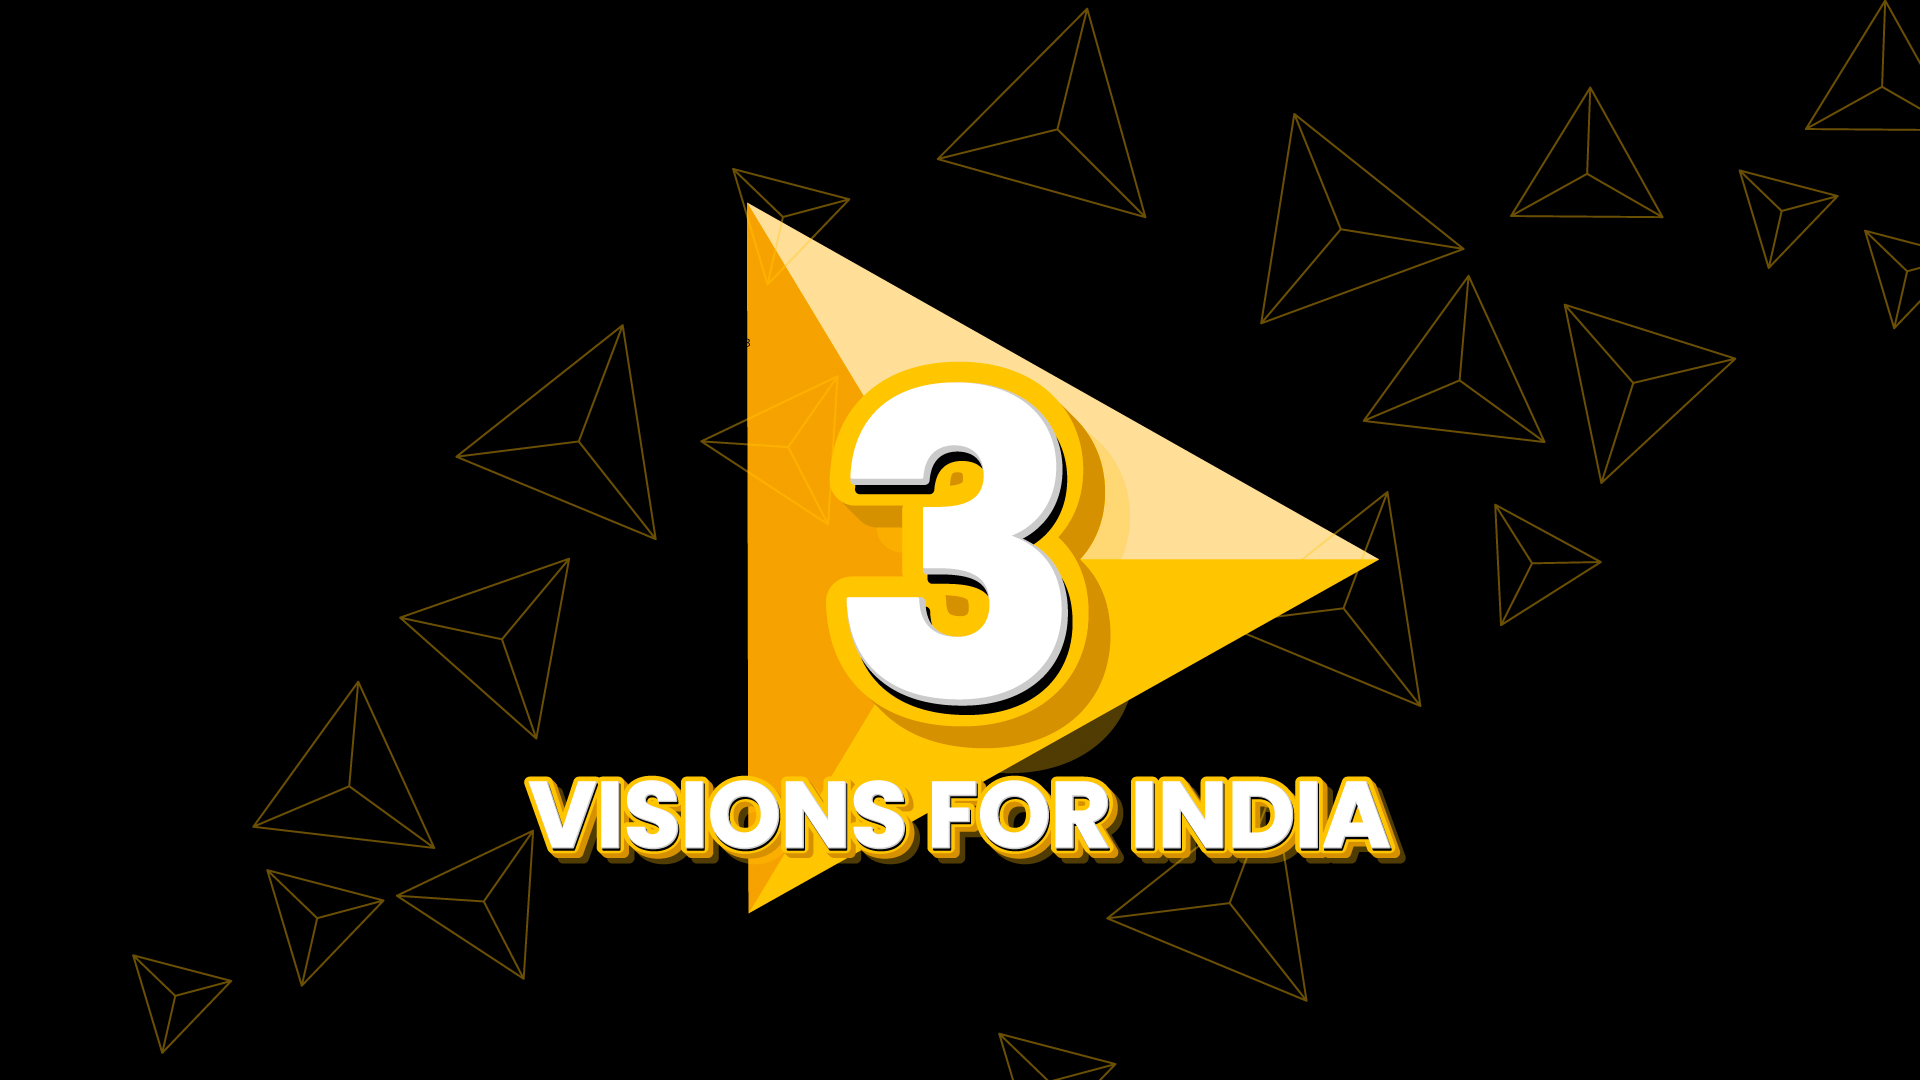 I have 3 visions for India.